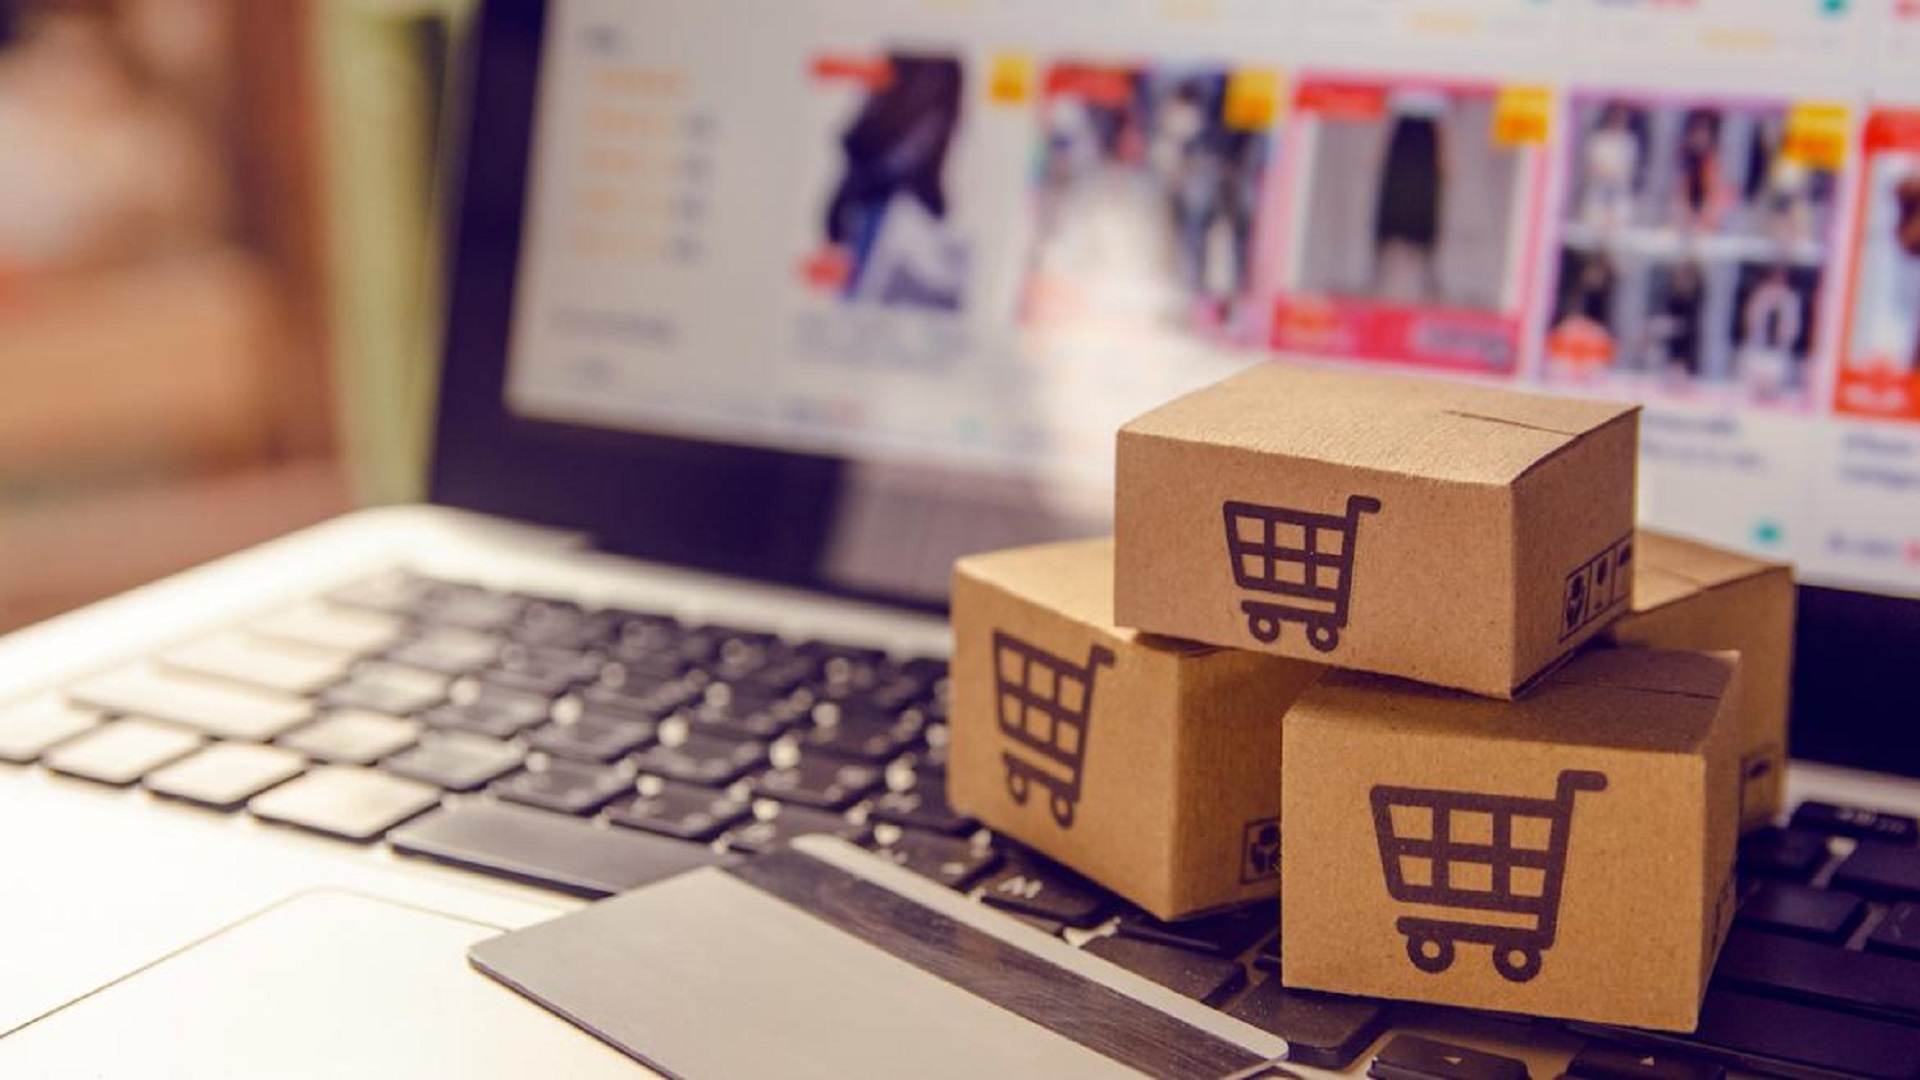 Large-Scale Retail: the future lies between online shopping and new processes